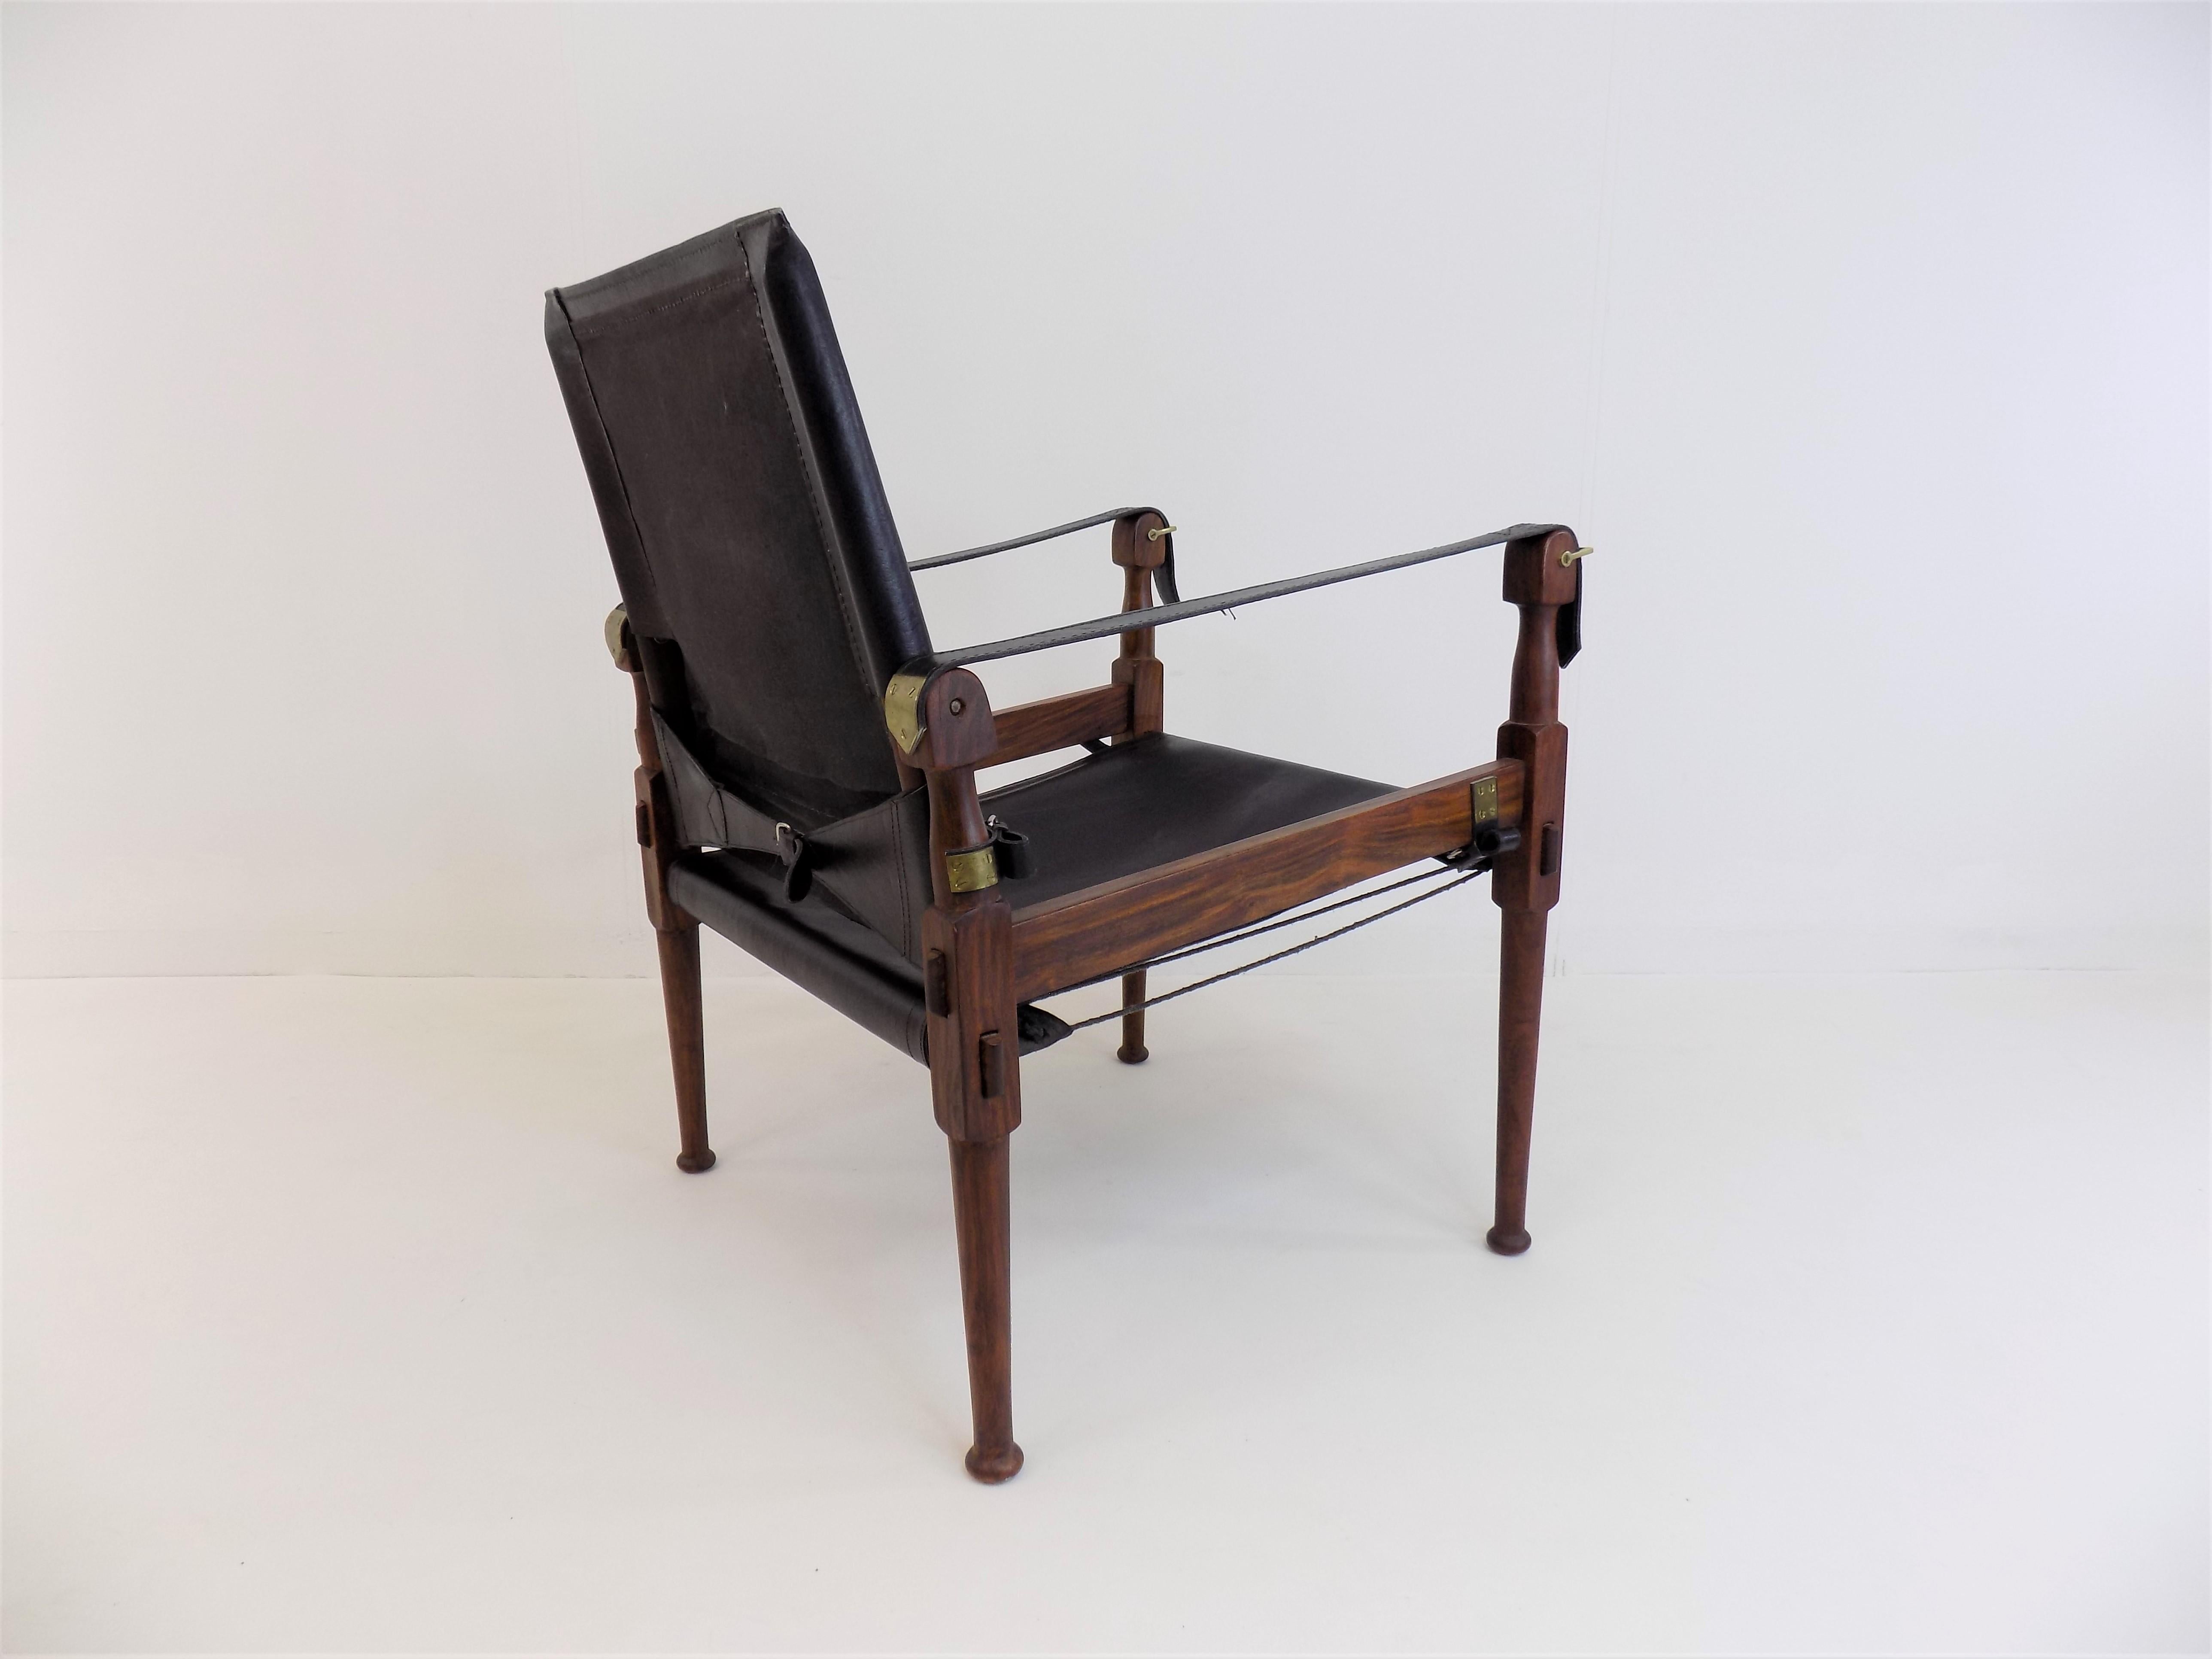 An original Hayat Roorkee Campaign Safari Chair from the 1960s in excellent condition. The black leather shows a nice, minimal patina on both chairs. The wooden frames, in mahogany, are in very good condition. The tensioning cables are all in order,